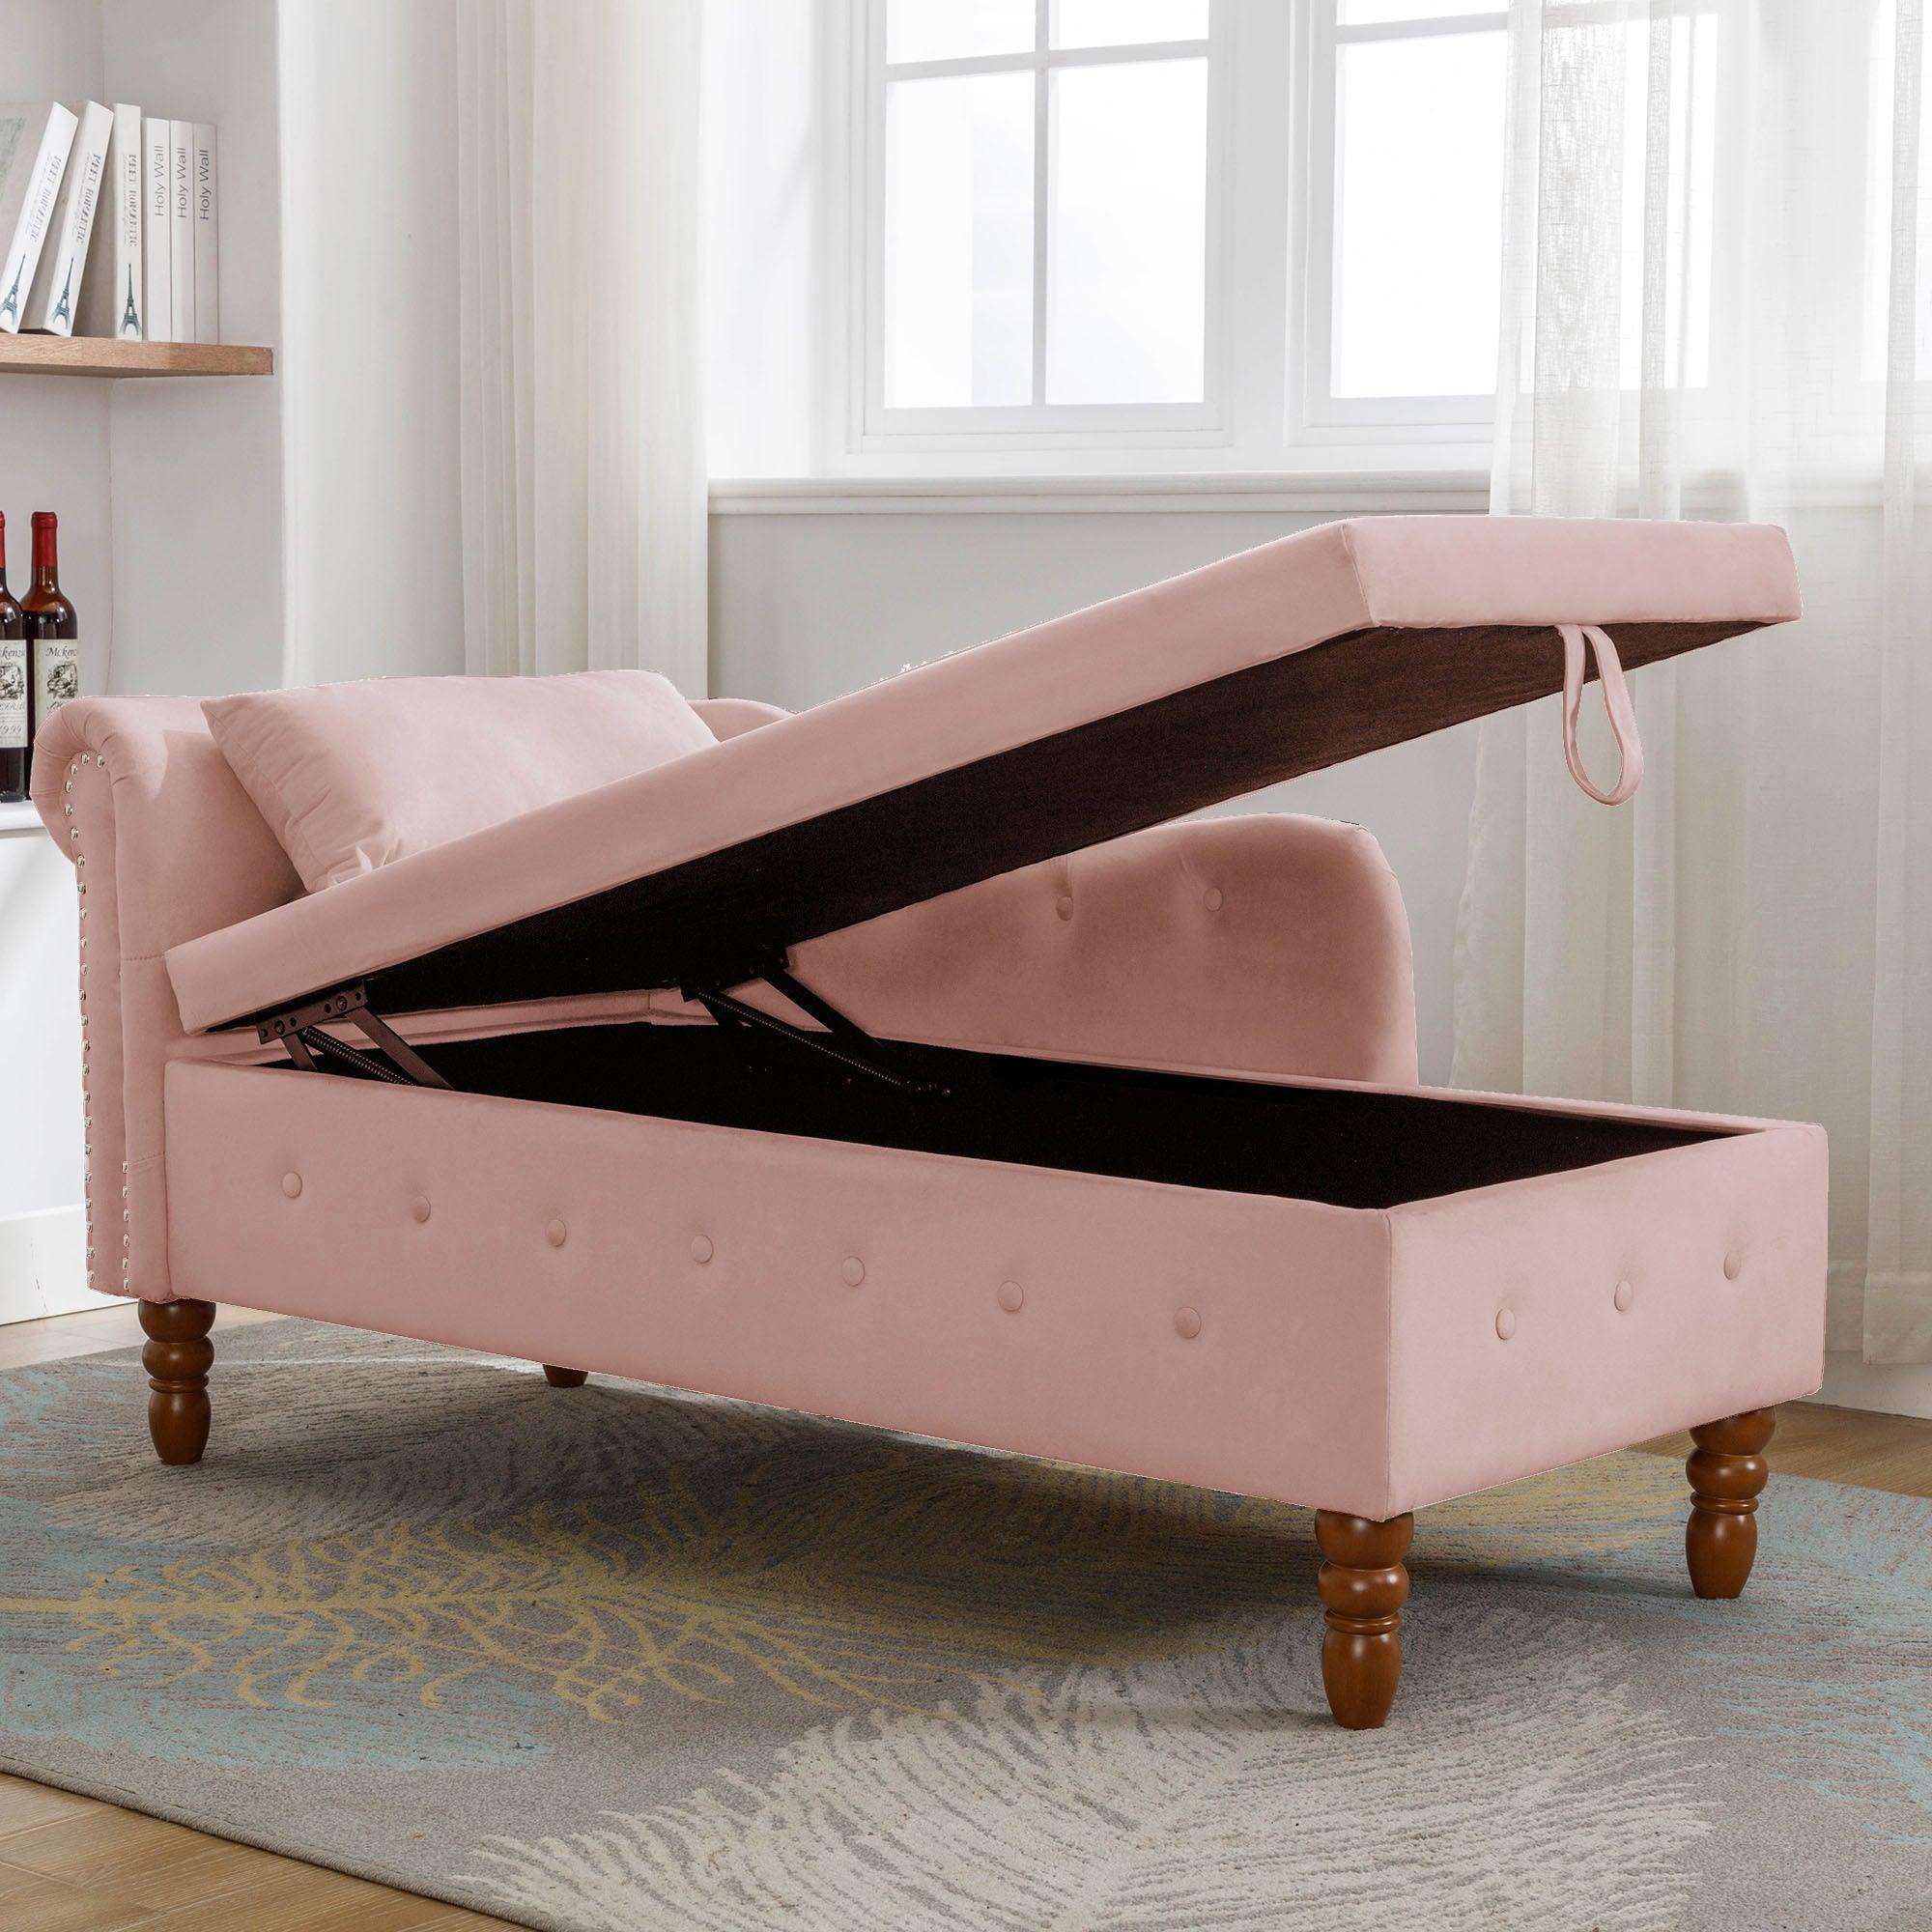 Velvet Pink Chaise Lounge Chair: Bedroom Comfort with Storage & Pillow - GrandNonStop